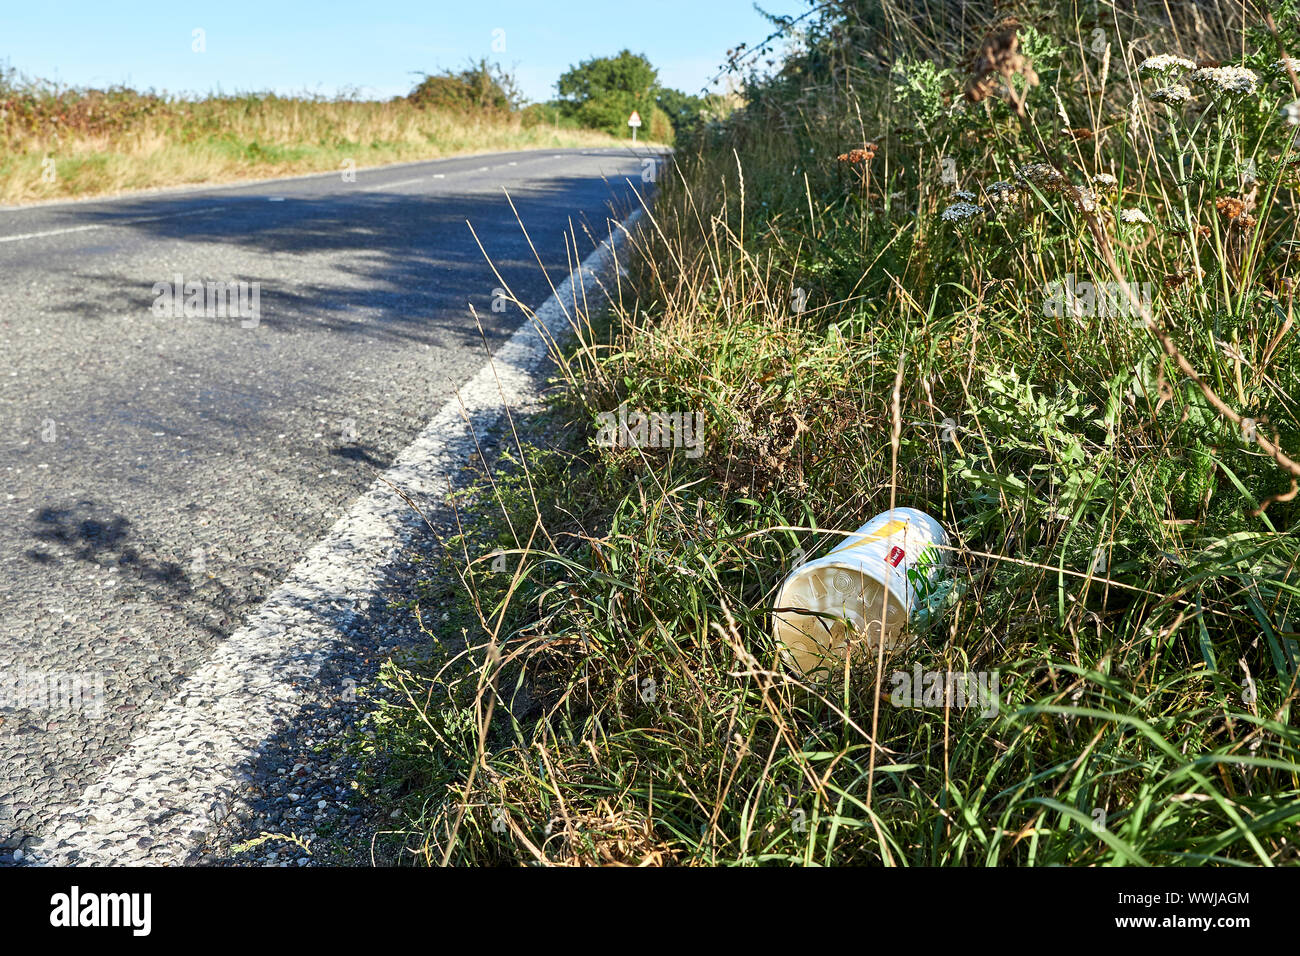 A low angled view of a cardboard cup that has been thrown out from a vehicle lead in the grass on the side of a main road that has no traffic on it Stock Photo